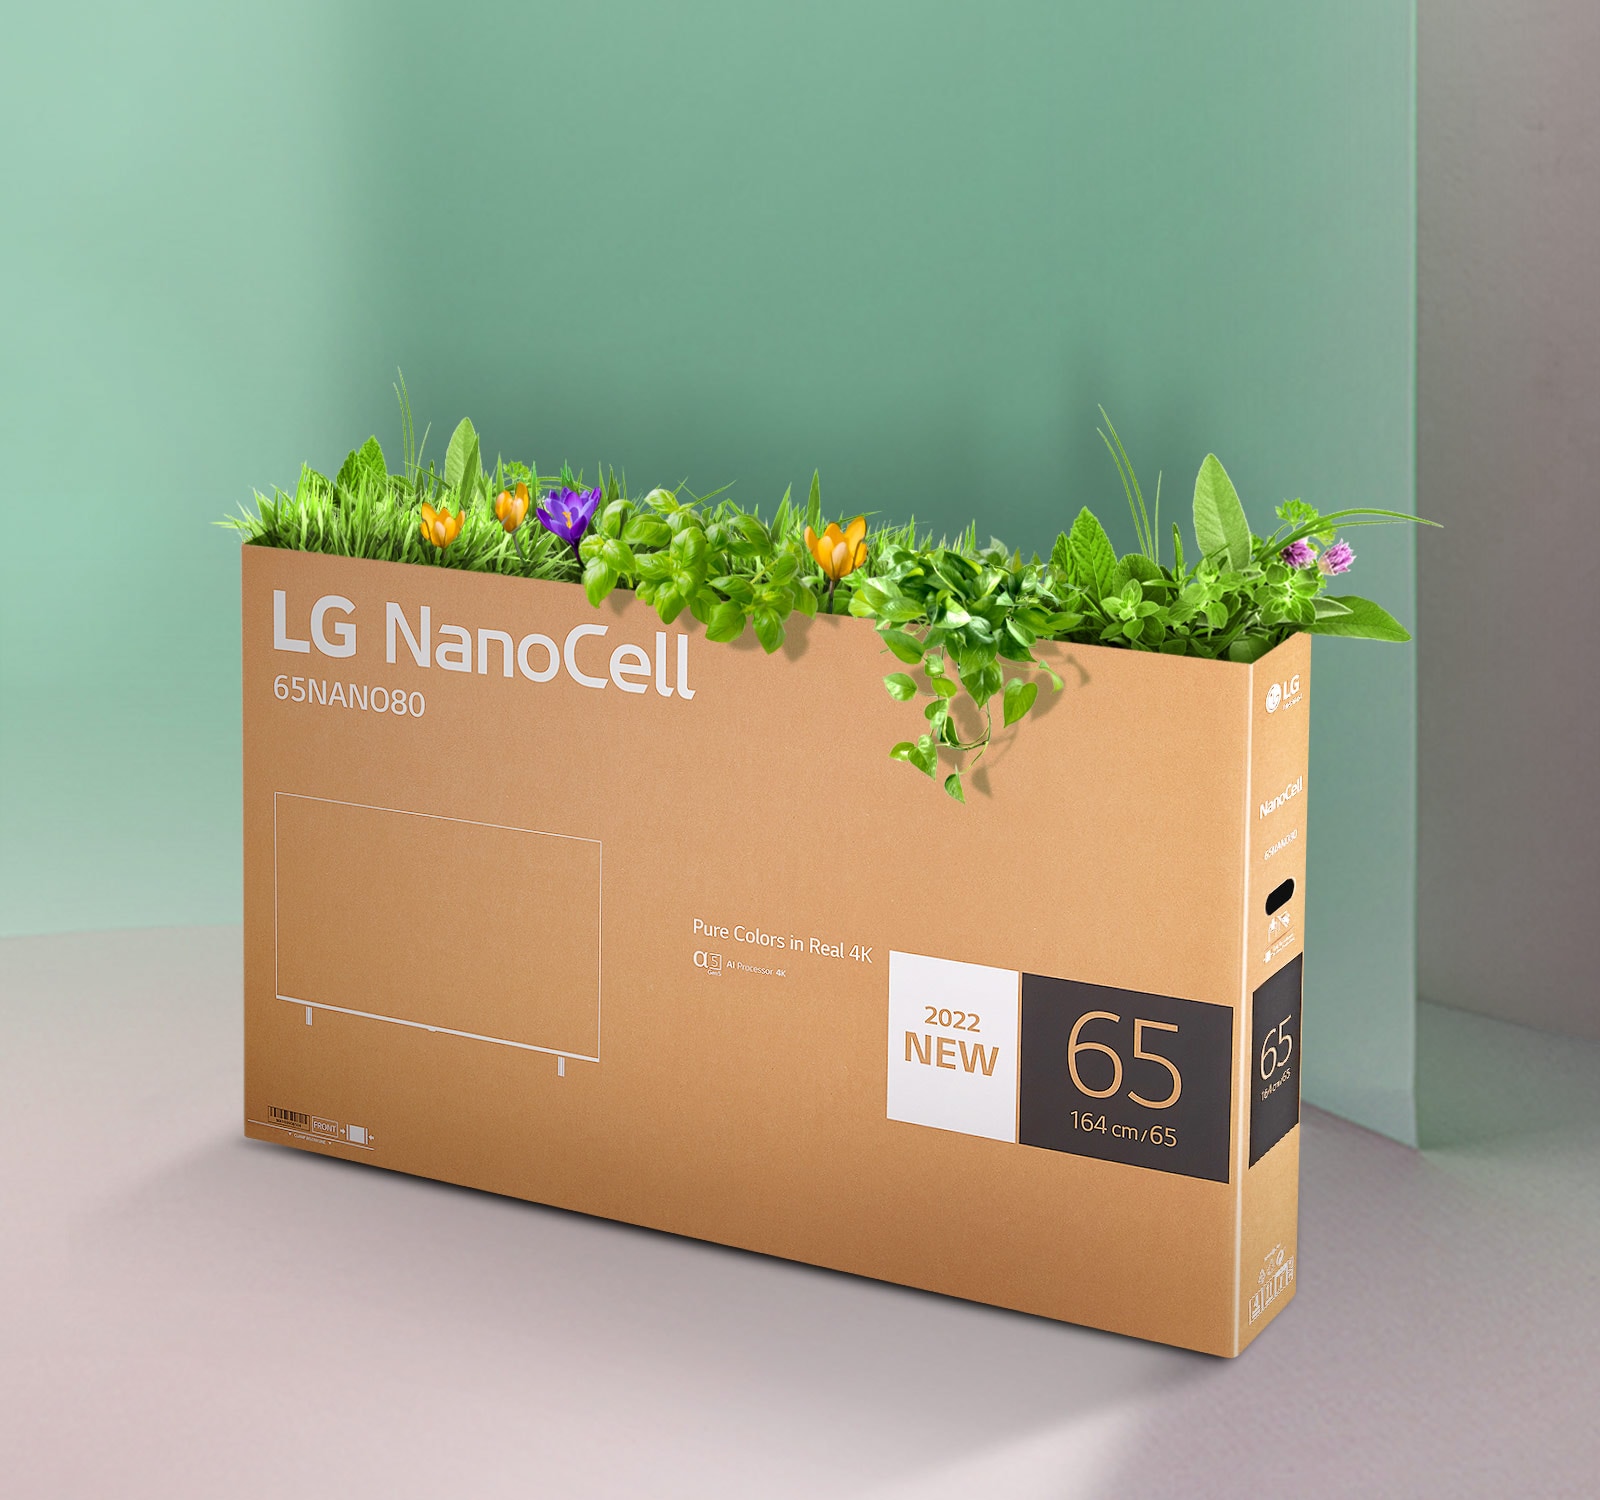 LG NanoCell TV's recyclable box with flowers and plants sprouting from the top of the box.